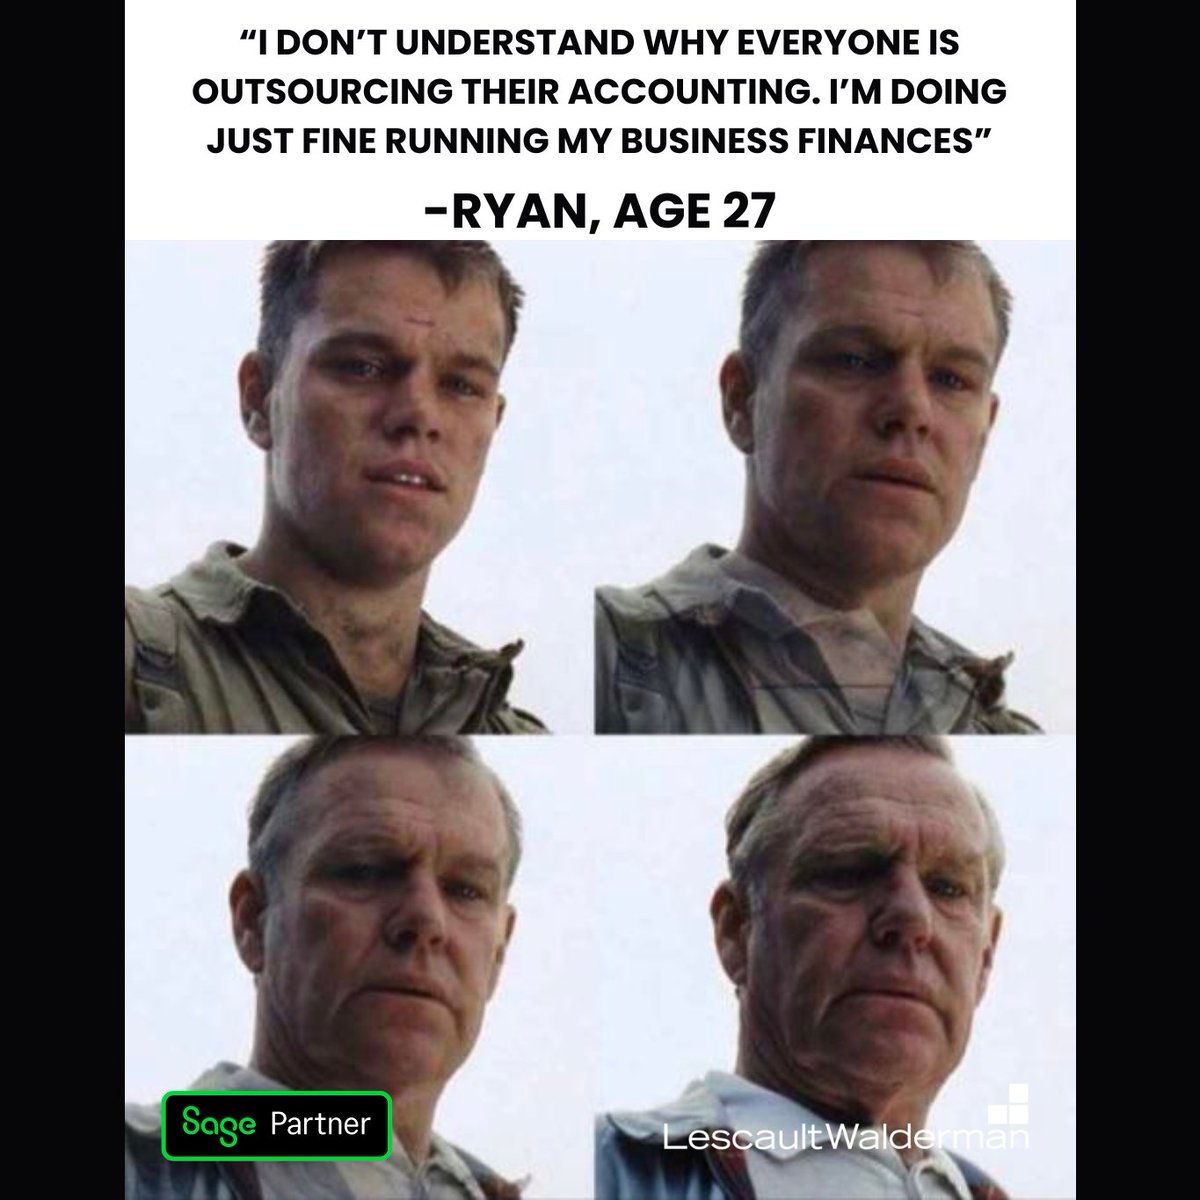 Looks like they did not, in fact, save Ryan. 

But we can💪

#savingprivateryan || #savingmoney || #outsourcing || #outsourcedaccounting